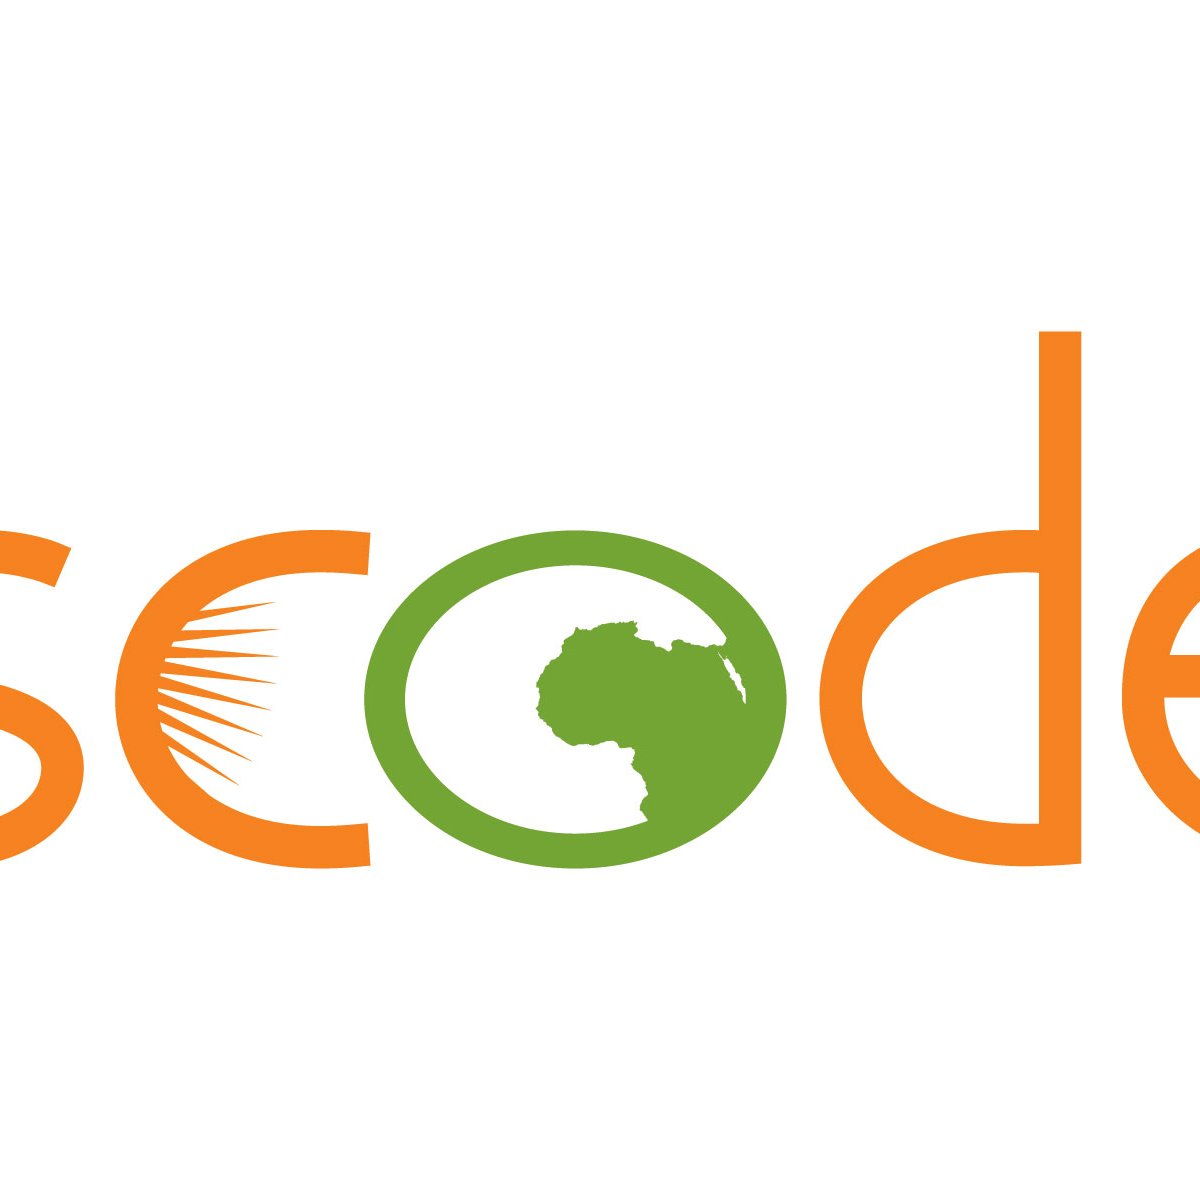 Scode Limited